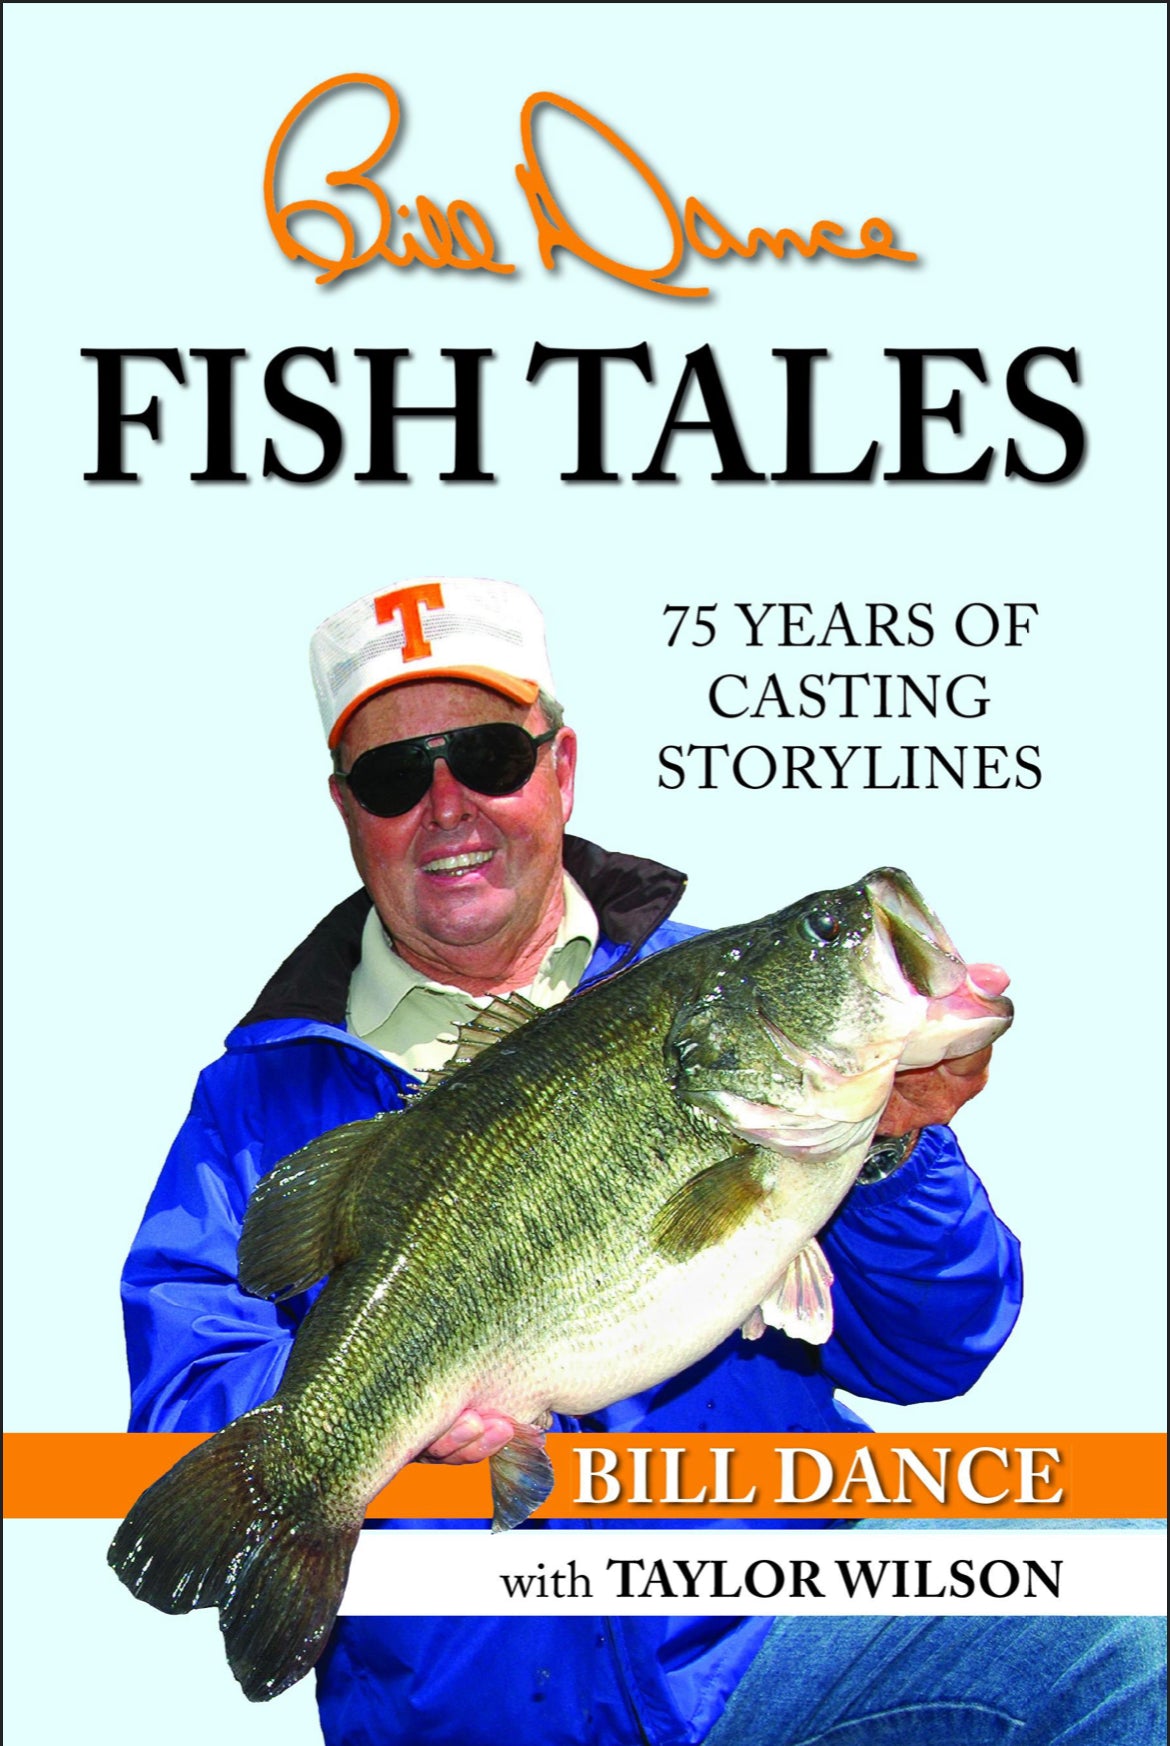 Fish Tales: 75 Years of Casting Storylines [Book]